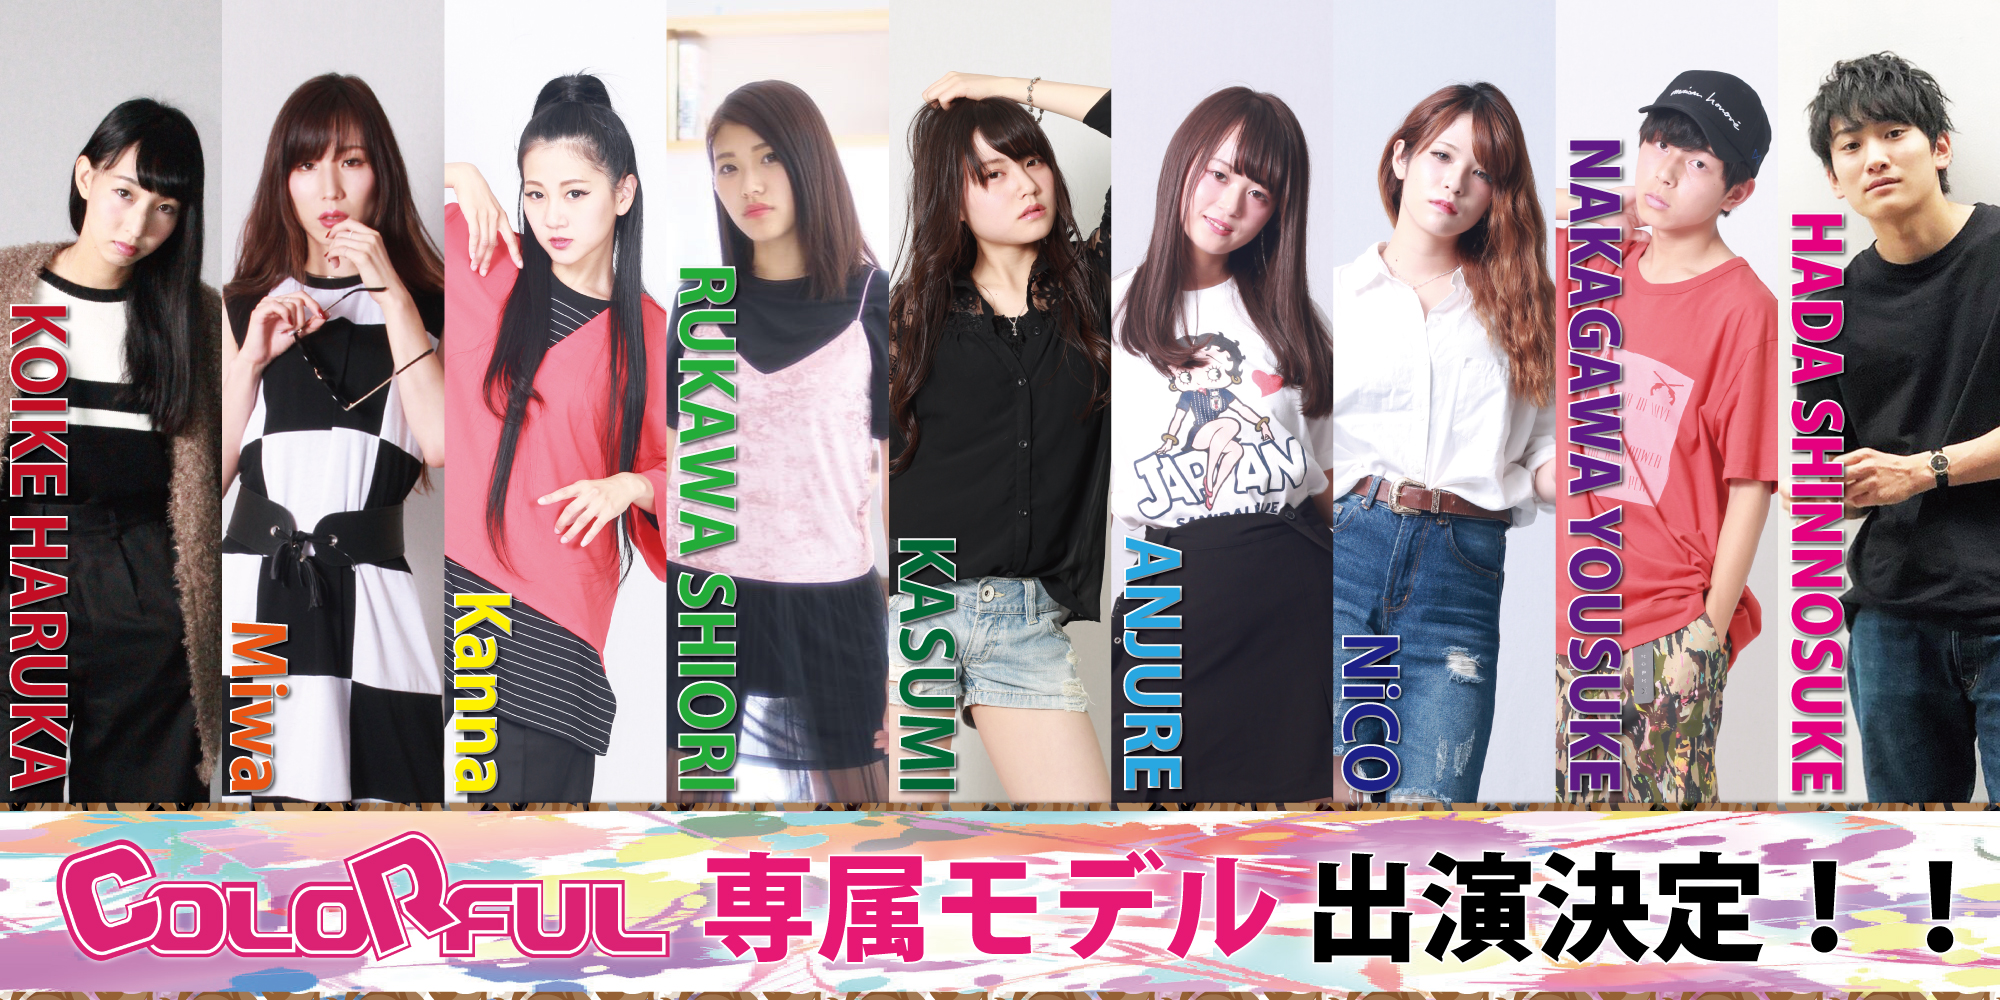 COLORFUL COLLECTION Light Vol.6